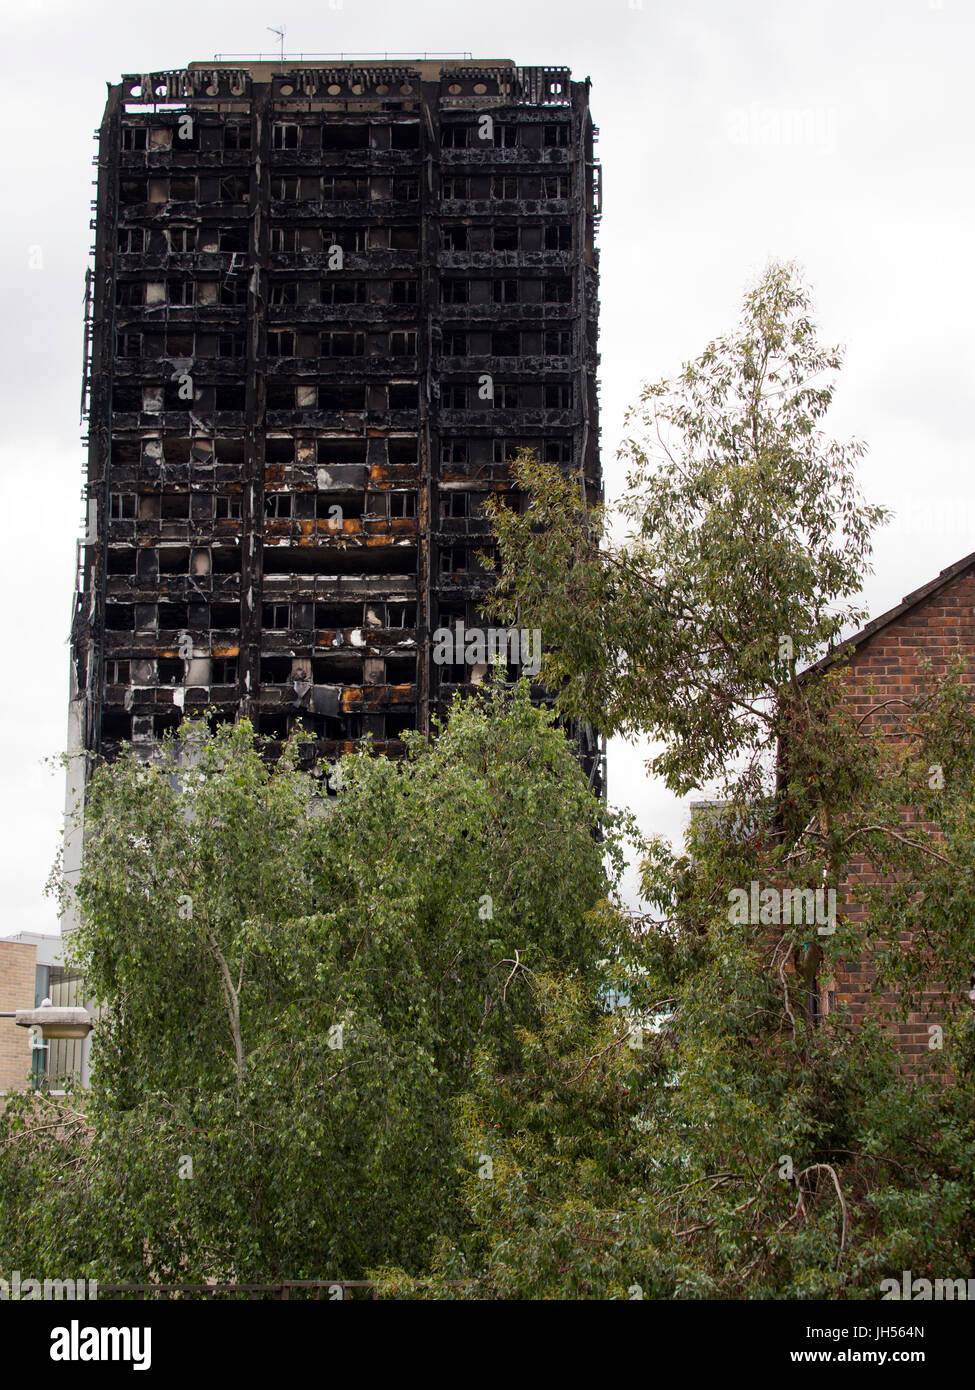 London, UK - Jul 4, 2017: The Grenfell Tower block in Kensington, West London in which at least 80 people are thought to have died following a fire. Stock Photo